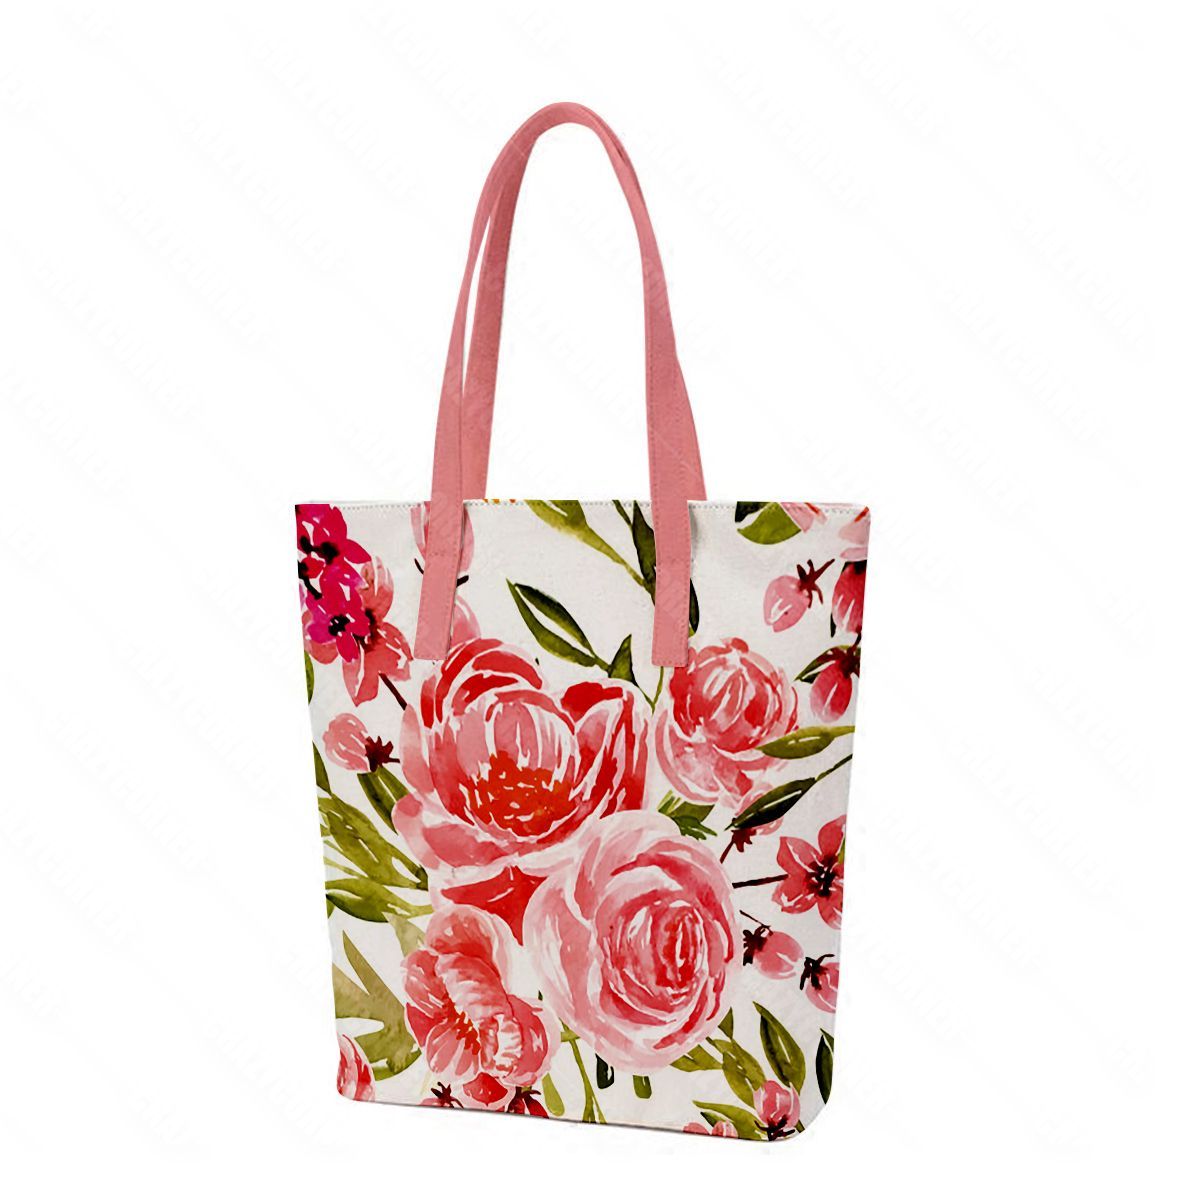 Cotton Canvas Tote Bags at Best Price in Ranaghat  Nature Crafts